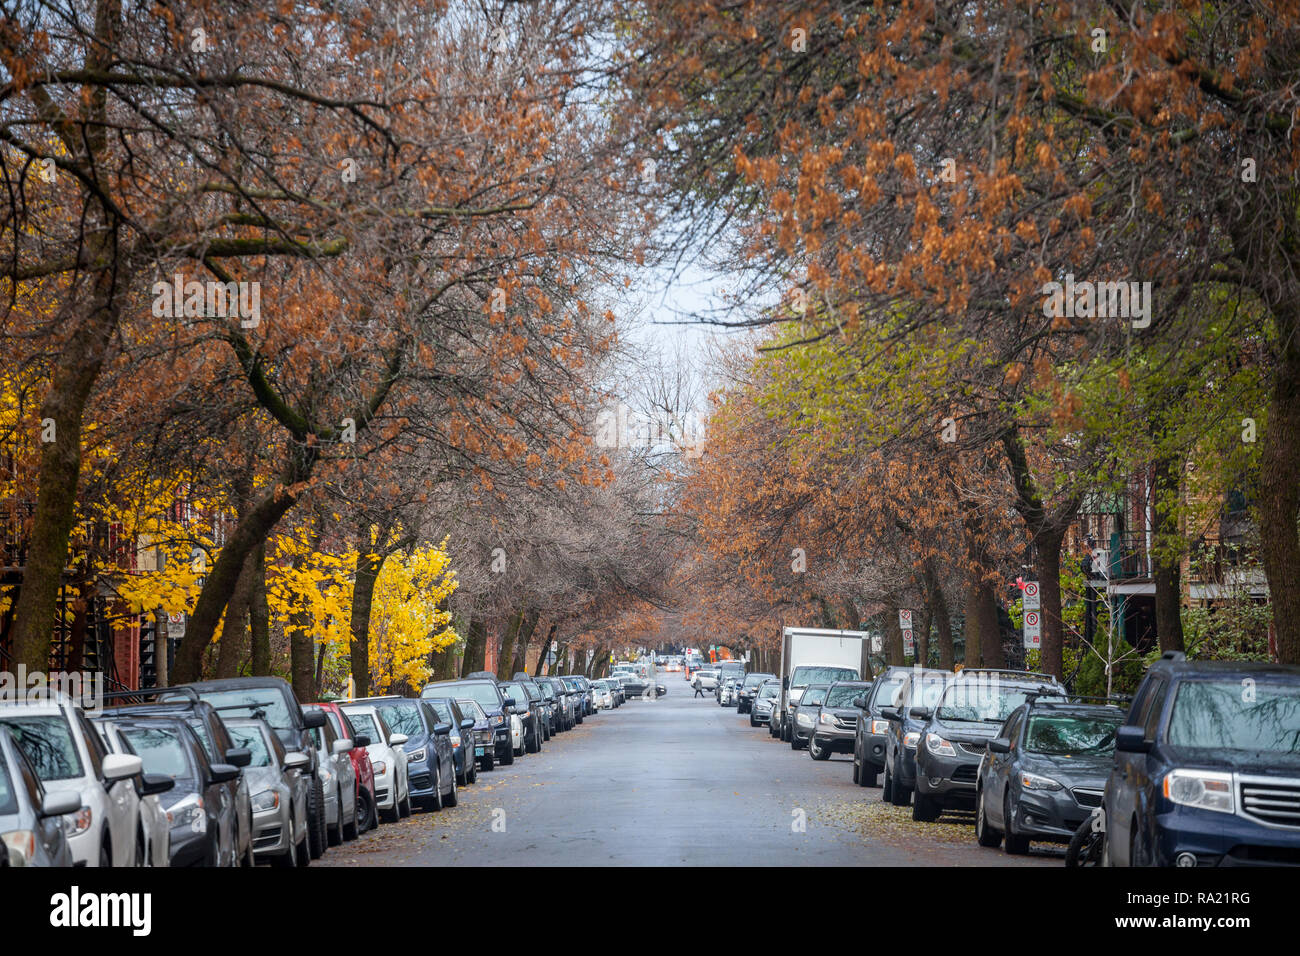 OTTAWA, CANADA - NOVEMBER 6, 2018: Typical north American residential street in autumn in Le Plateau, Montreal, Quebec, during an autumn afternoon, wi Stock Photo